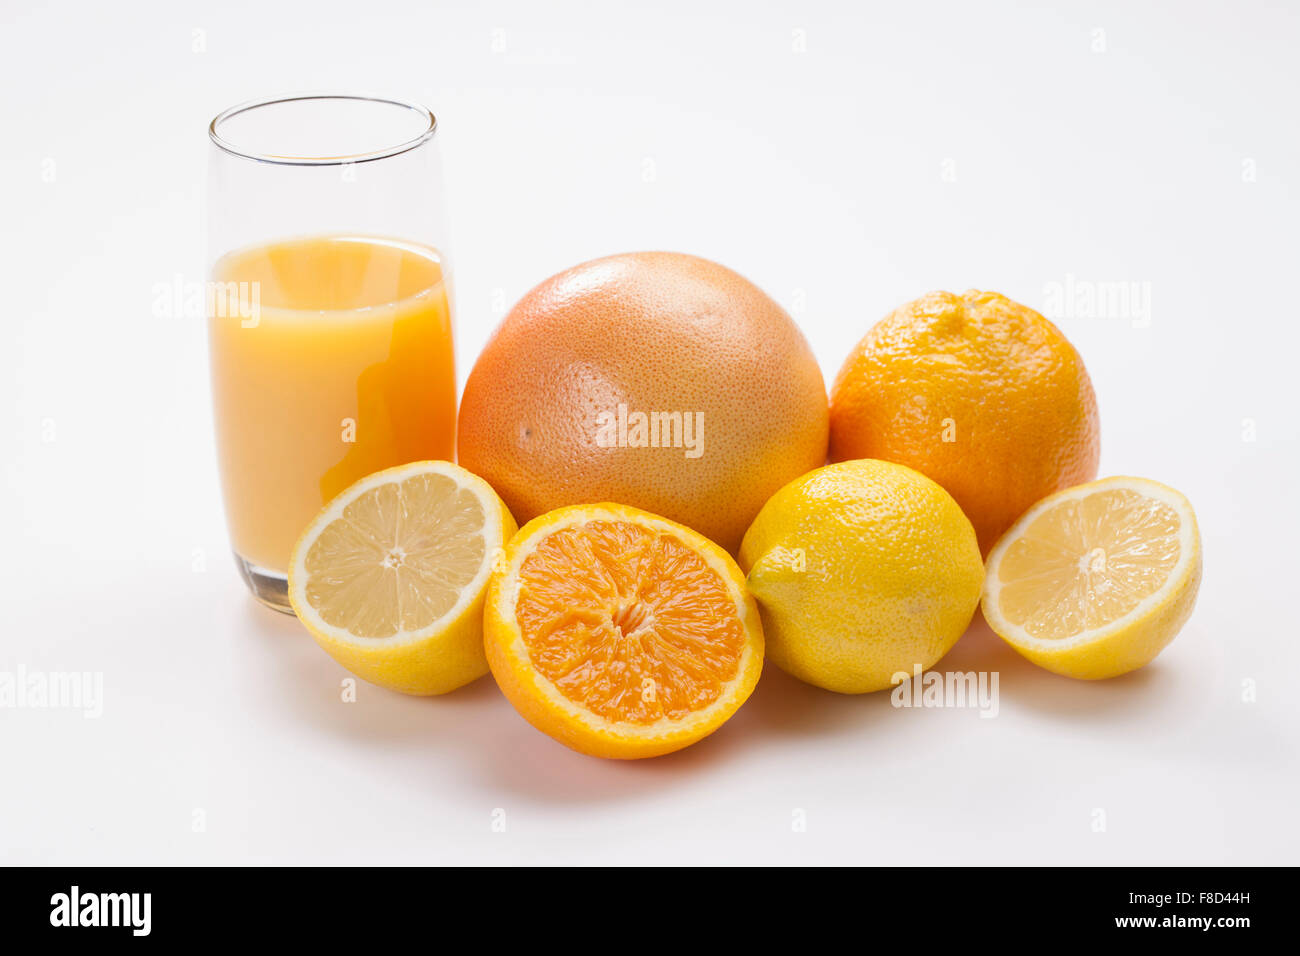 Orange and yellow color of fruits including grapefruit, orange, lemons with a glass of juice in orange color Stock Photo